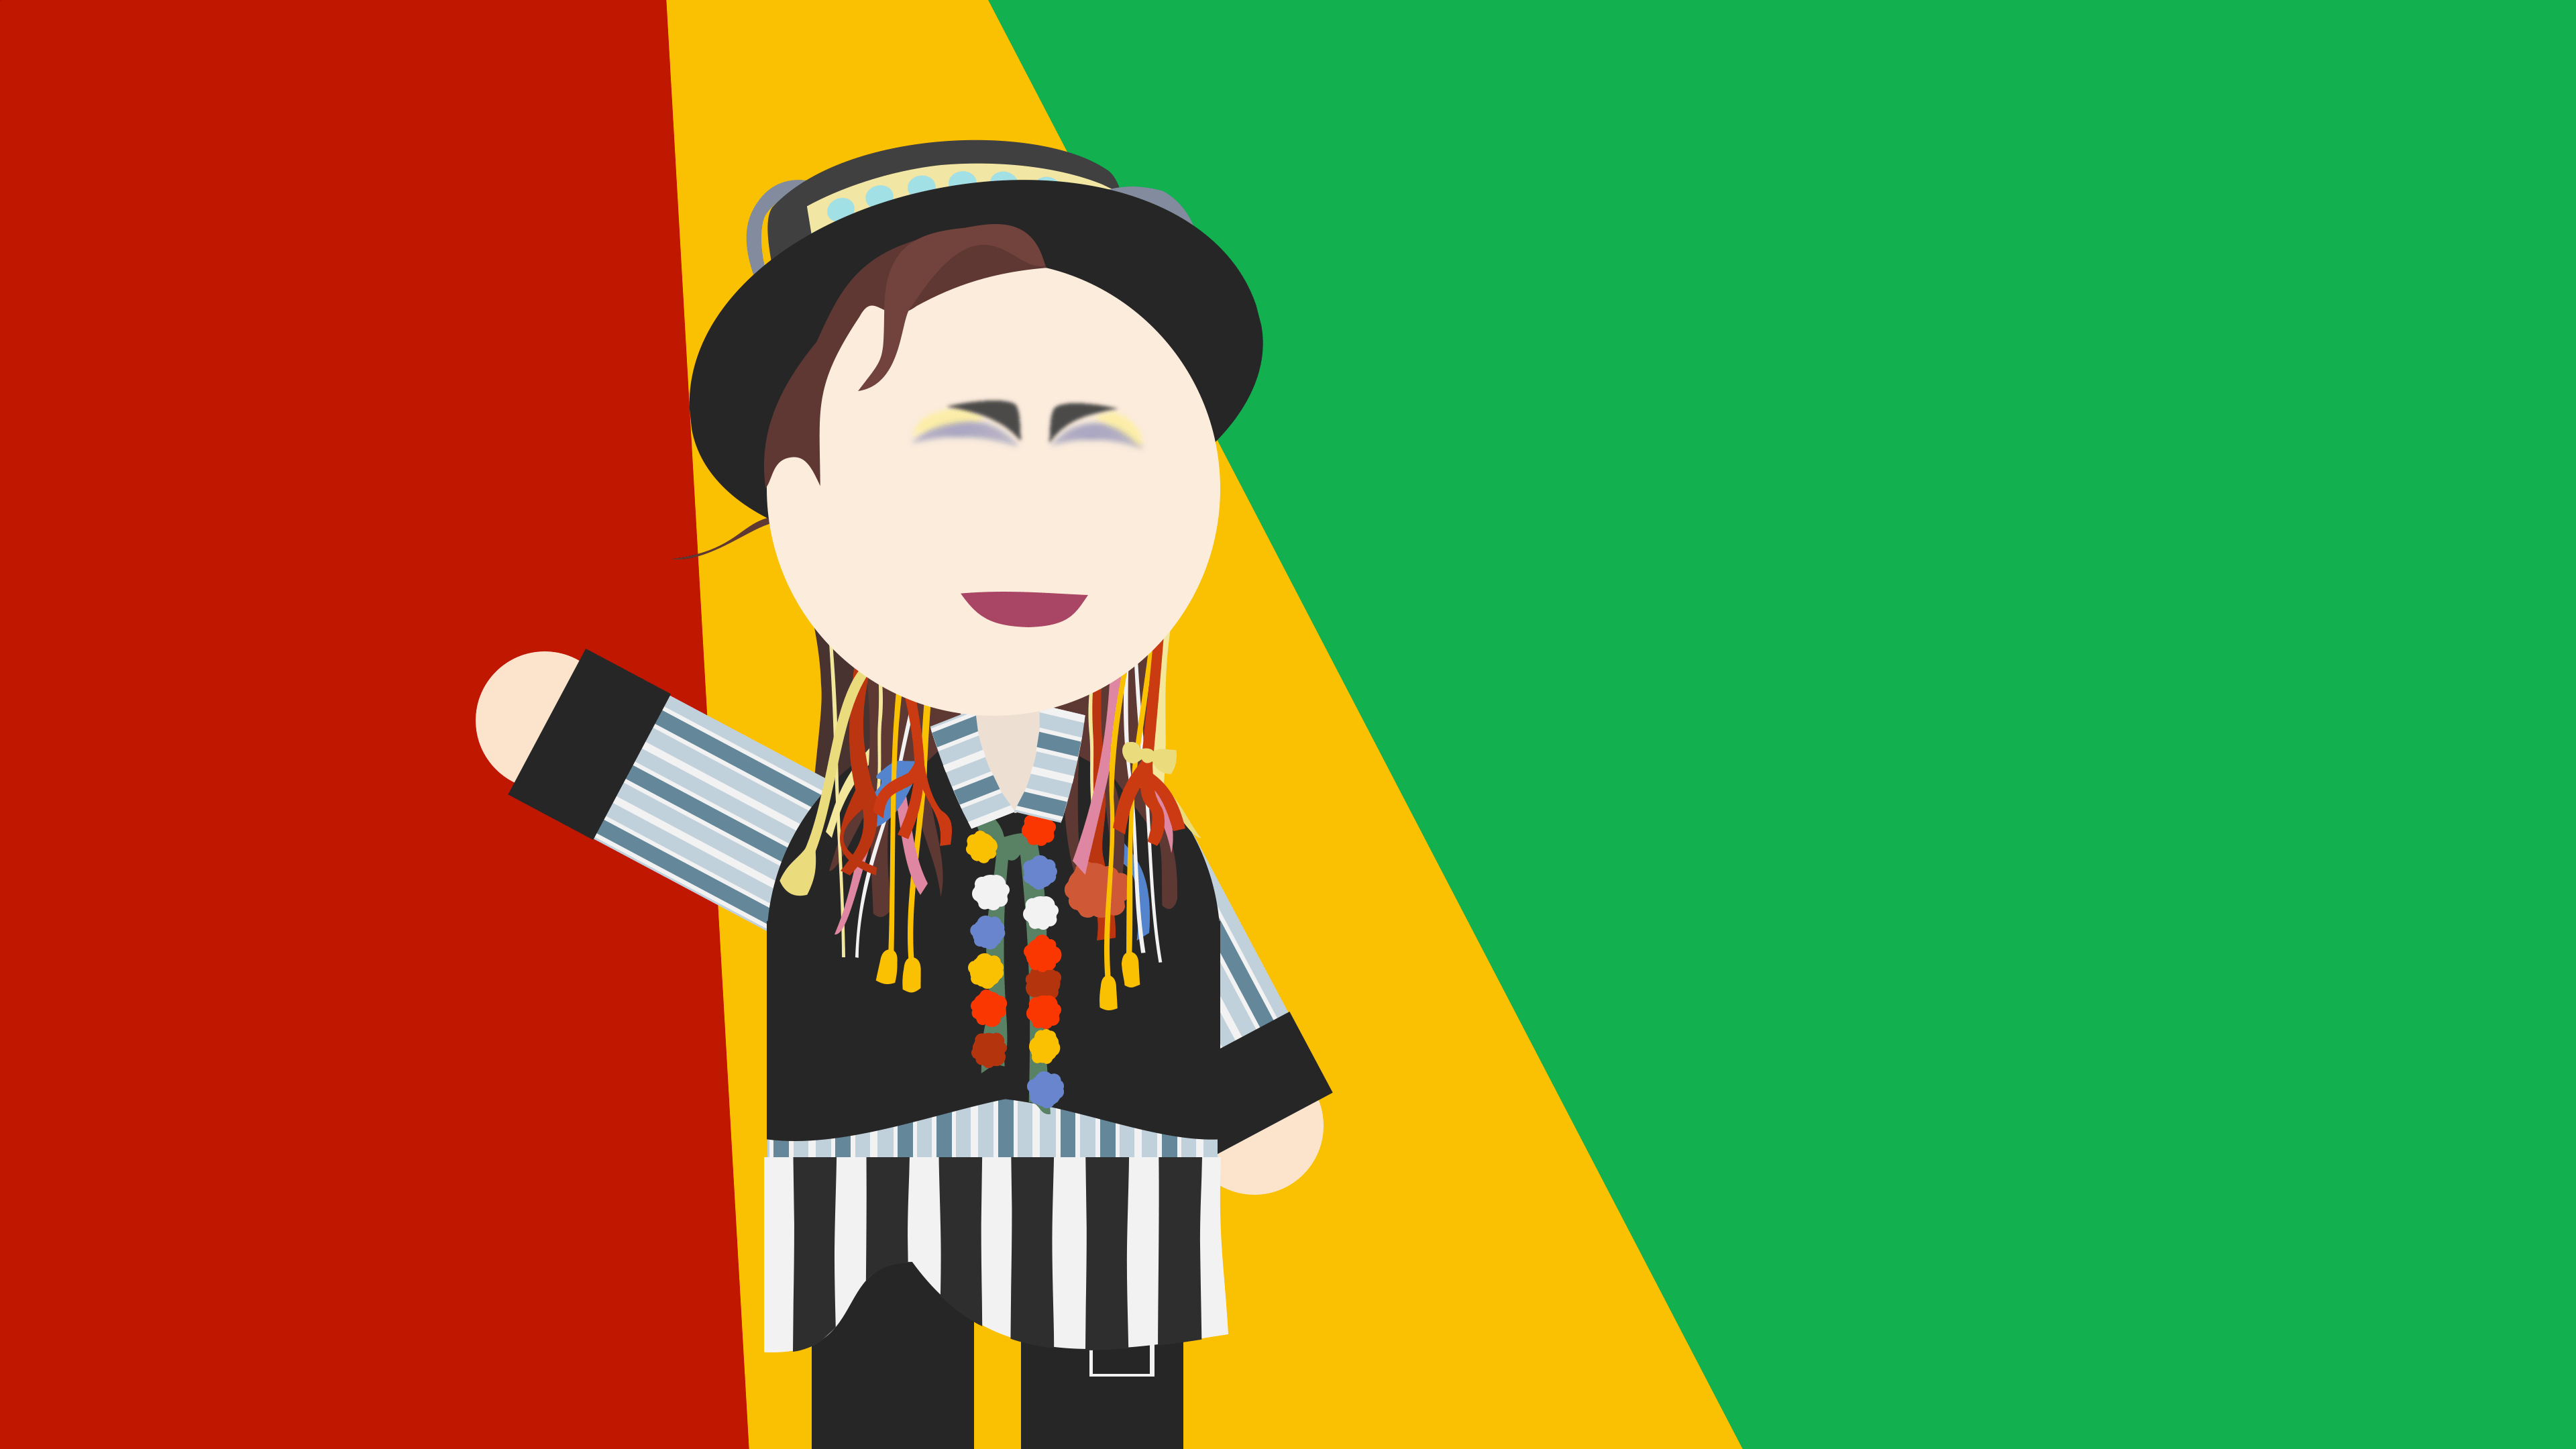 Boy George from the Karma Chameleon music video